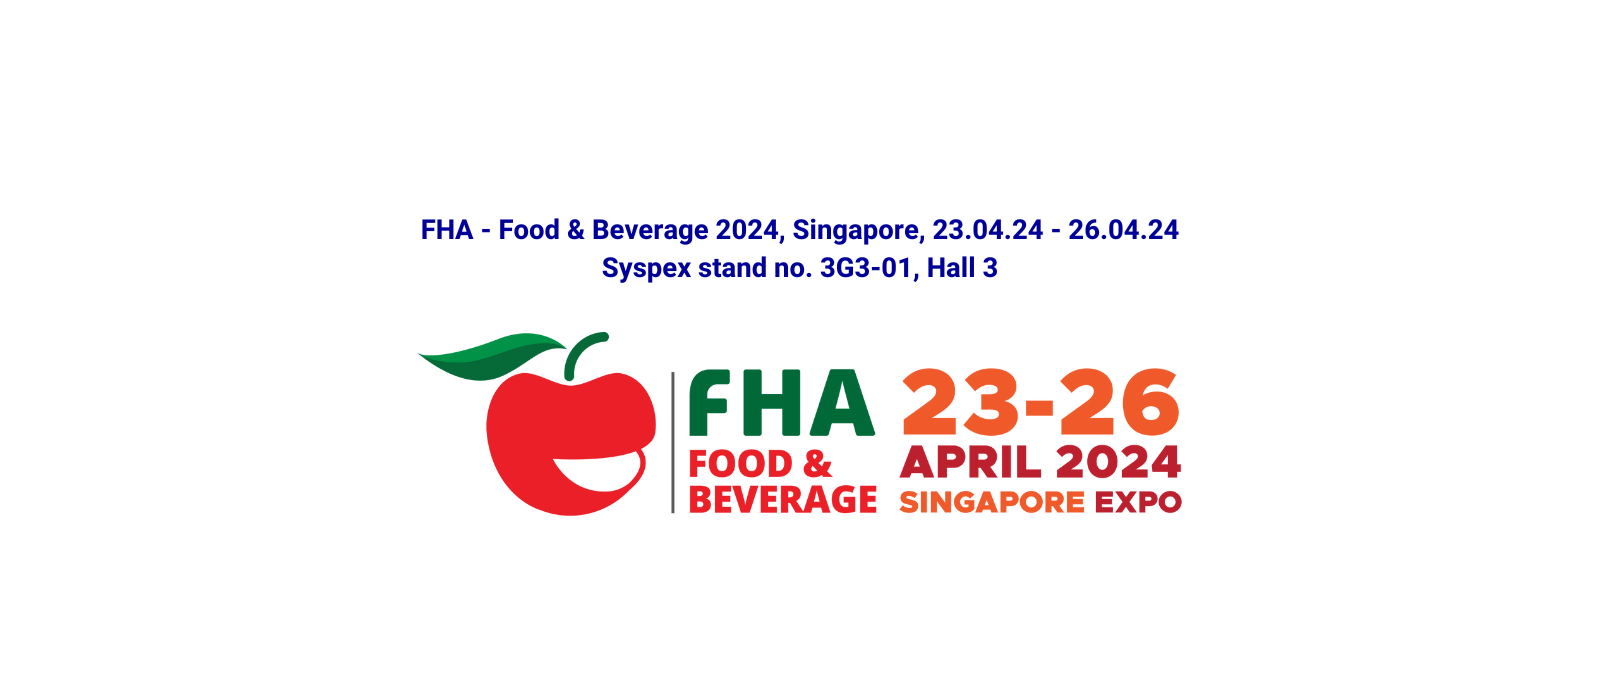 Fabbri Group and Syspex are waiting for you at FHA-Food & Beverage 2024